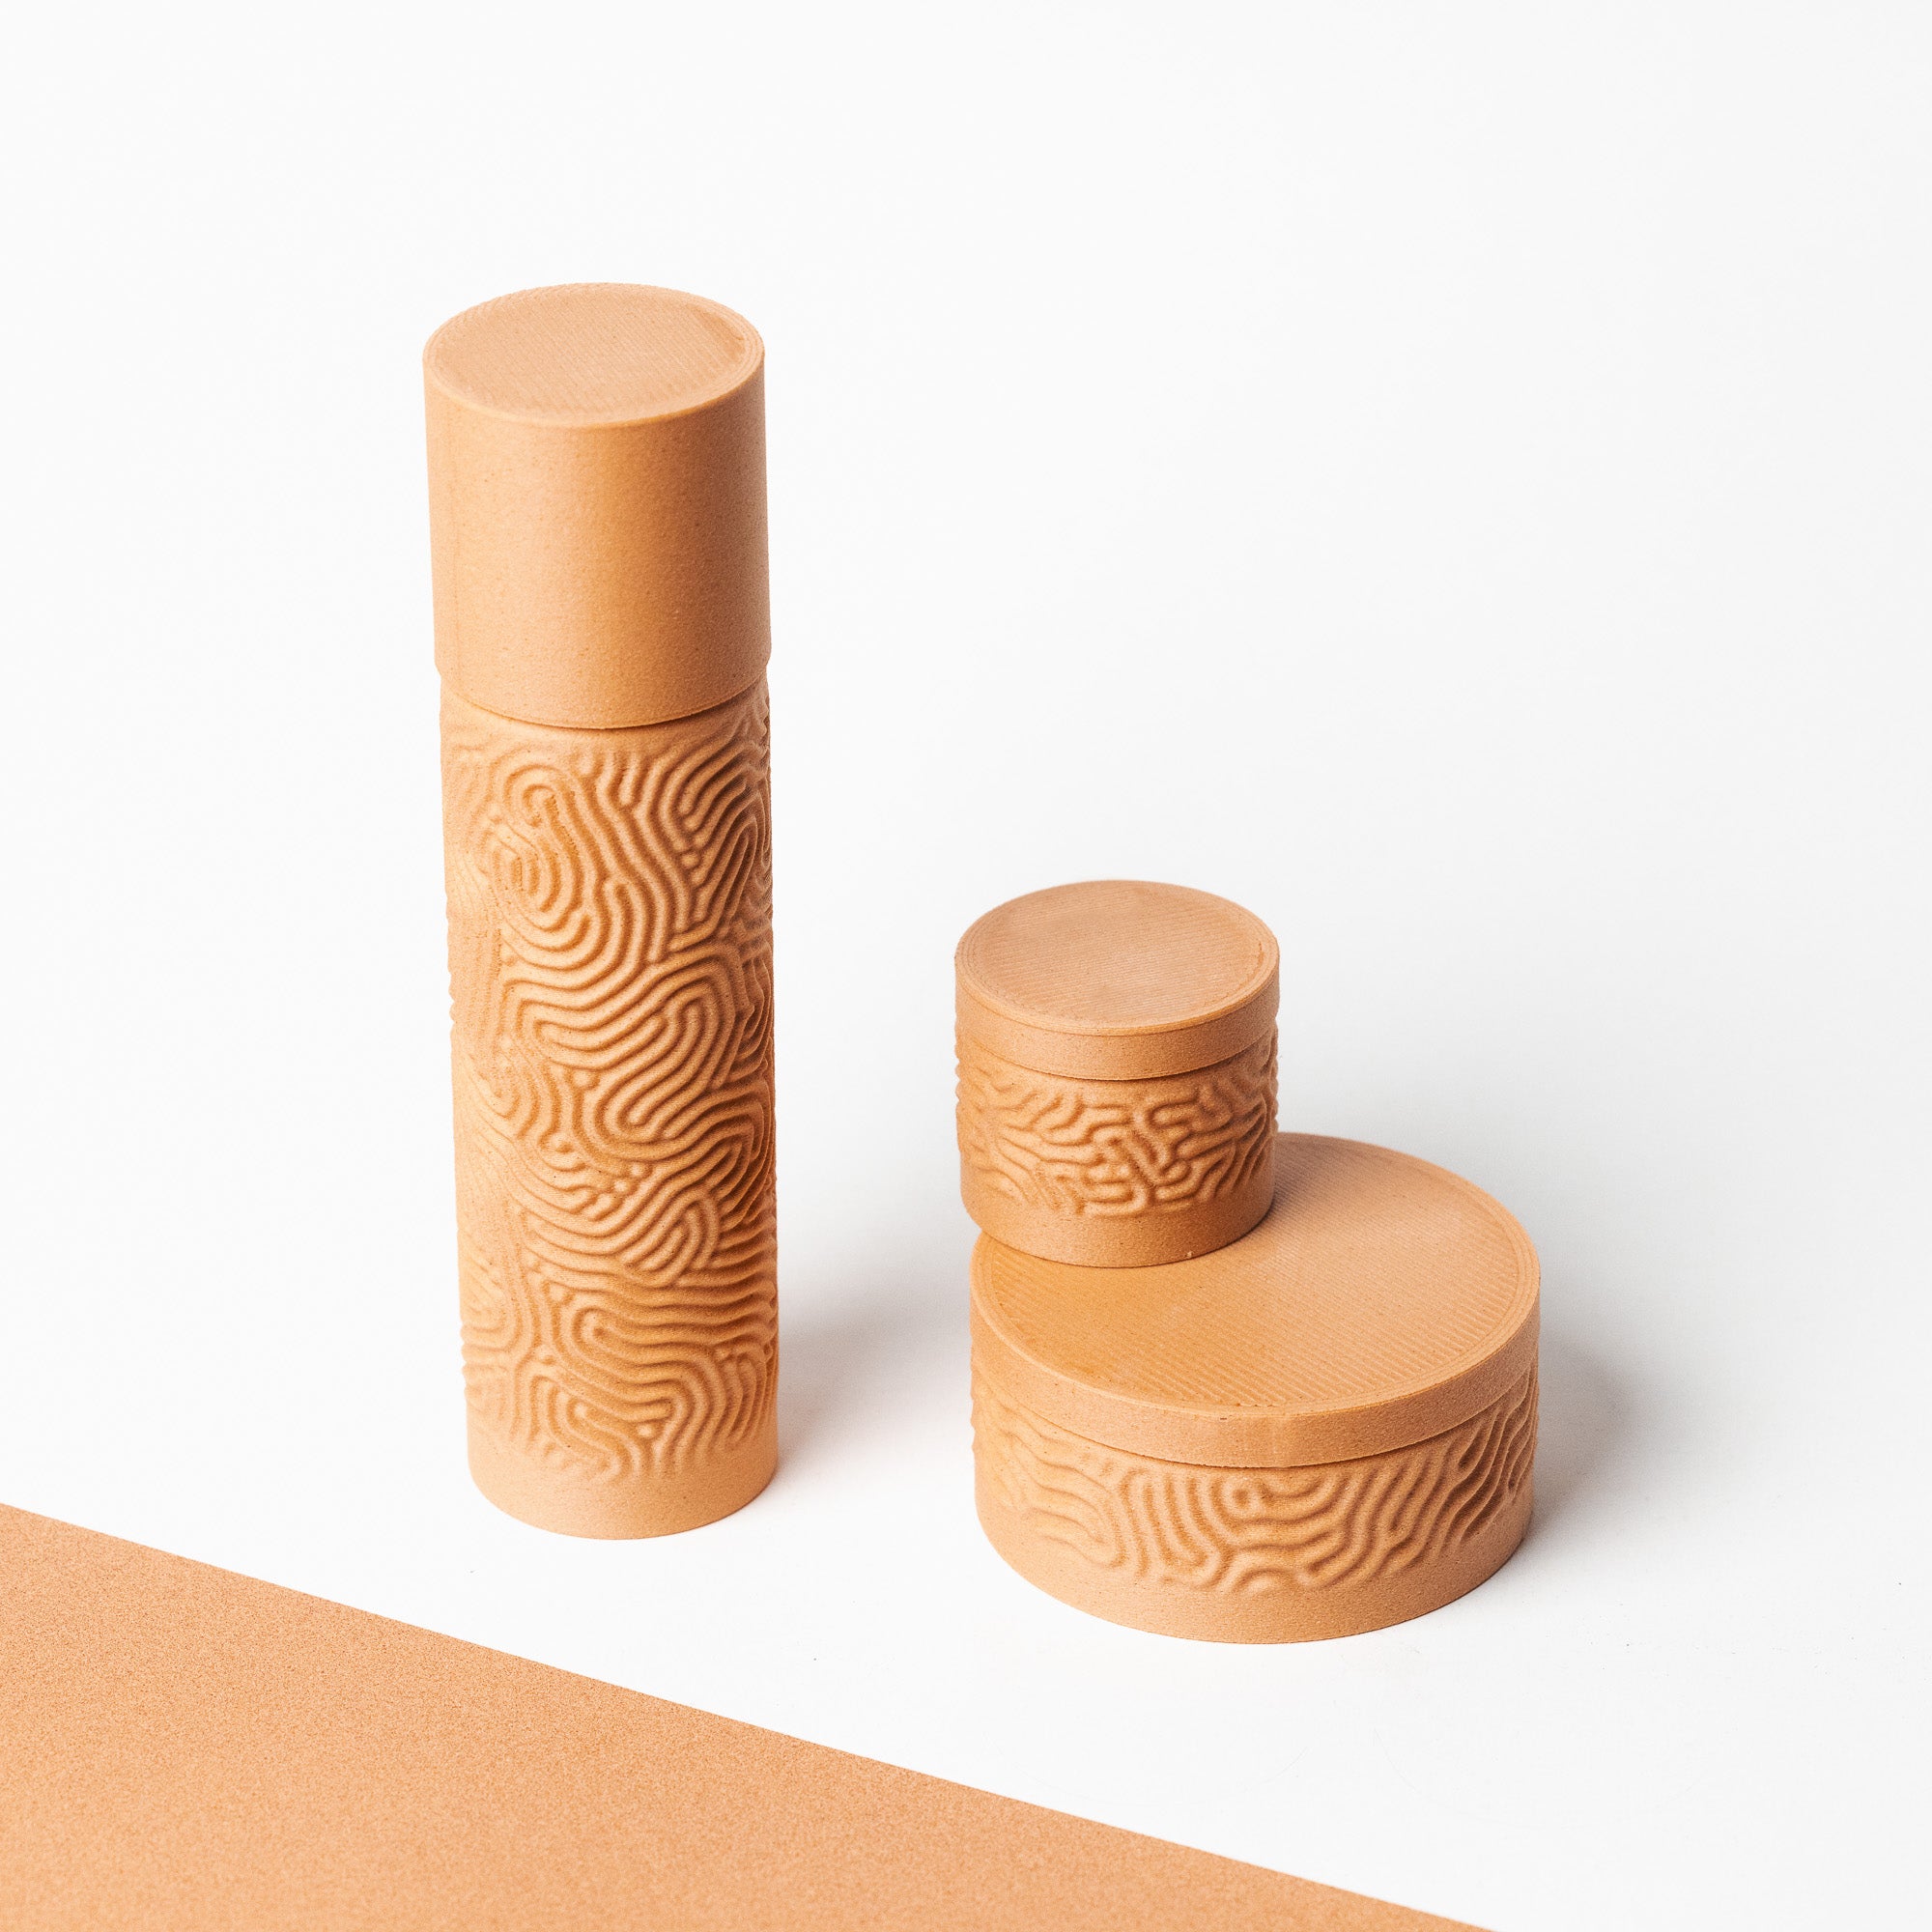 The Traveler's Pack - Wood-based boxes - Coral